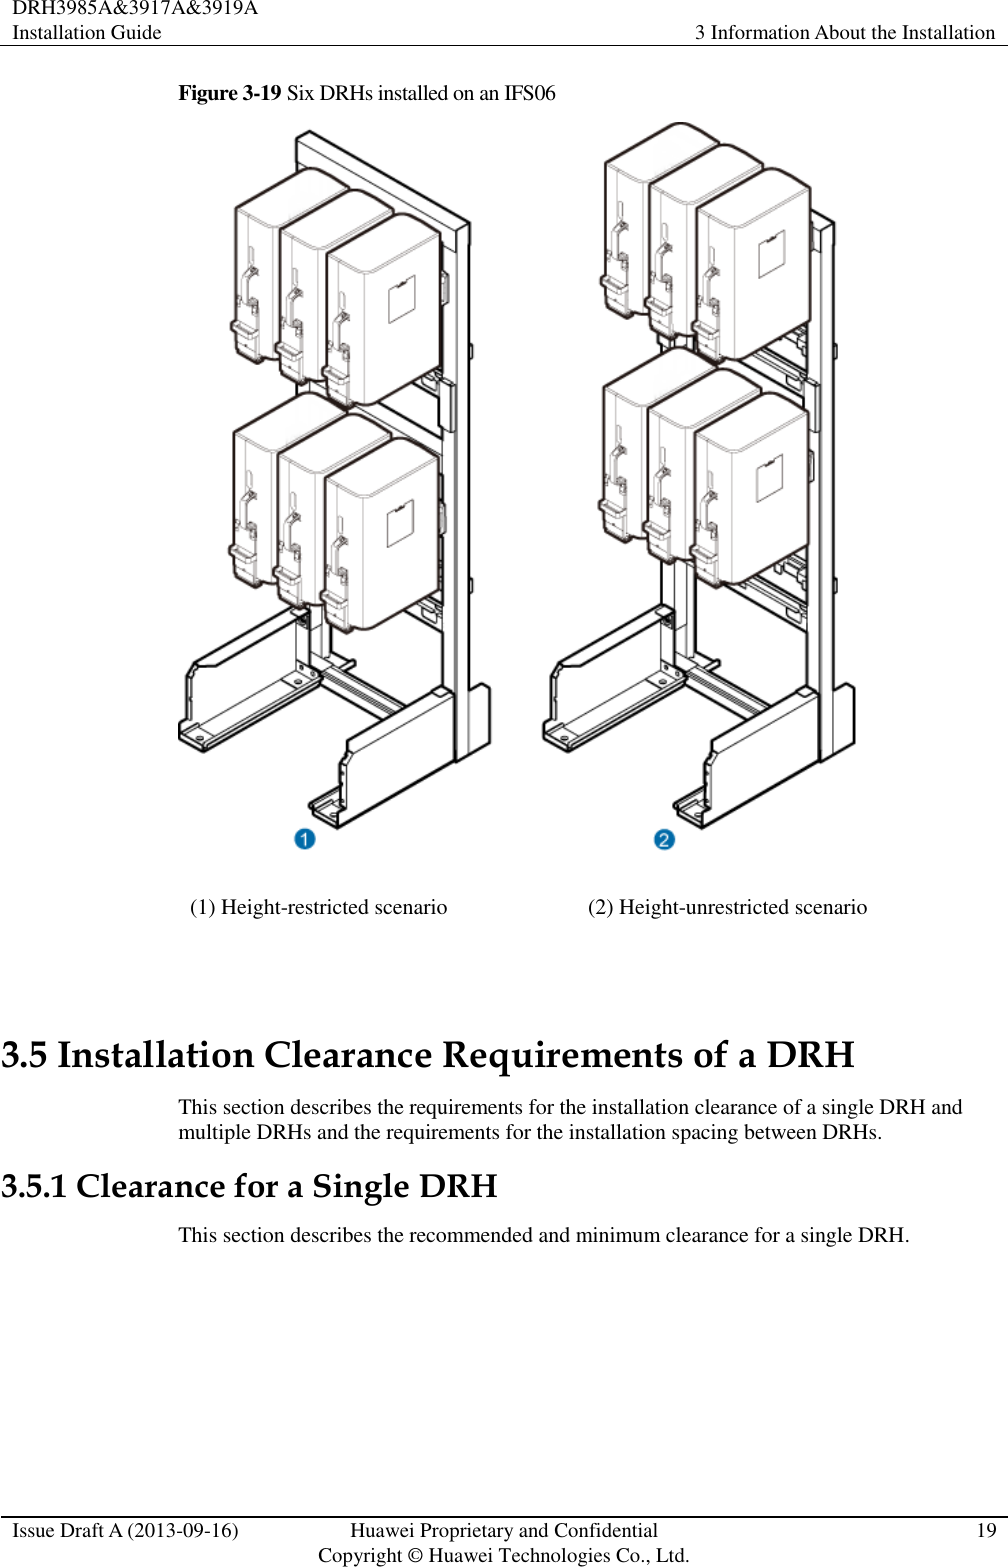 DRH3985A&amp;3917A&amp;3919A Installation Guide 3 Information About the Installation  Issue Draft A (2013-09-16) Huawei Proprietary and Confidential                                     Copyright © Huawei Technologies Co., Ltd. 19  Figure 3-19 Six DRHs installed on an IFS06  (1) Height-restricted scenario (2) Height-unrestricted scenario  3.5 Installation Clearance Requirements of a DRH This section describes the requirements for the installation clearance of a single DRH and multiple DRHs and the requirements for the installation spacing between DRHs. 3.5.1 Clearance for a Single DRH This section describes the recommended and minimum clearance for a single DRH. 